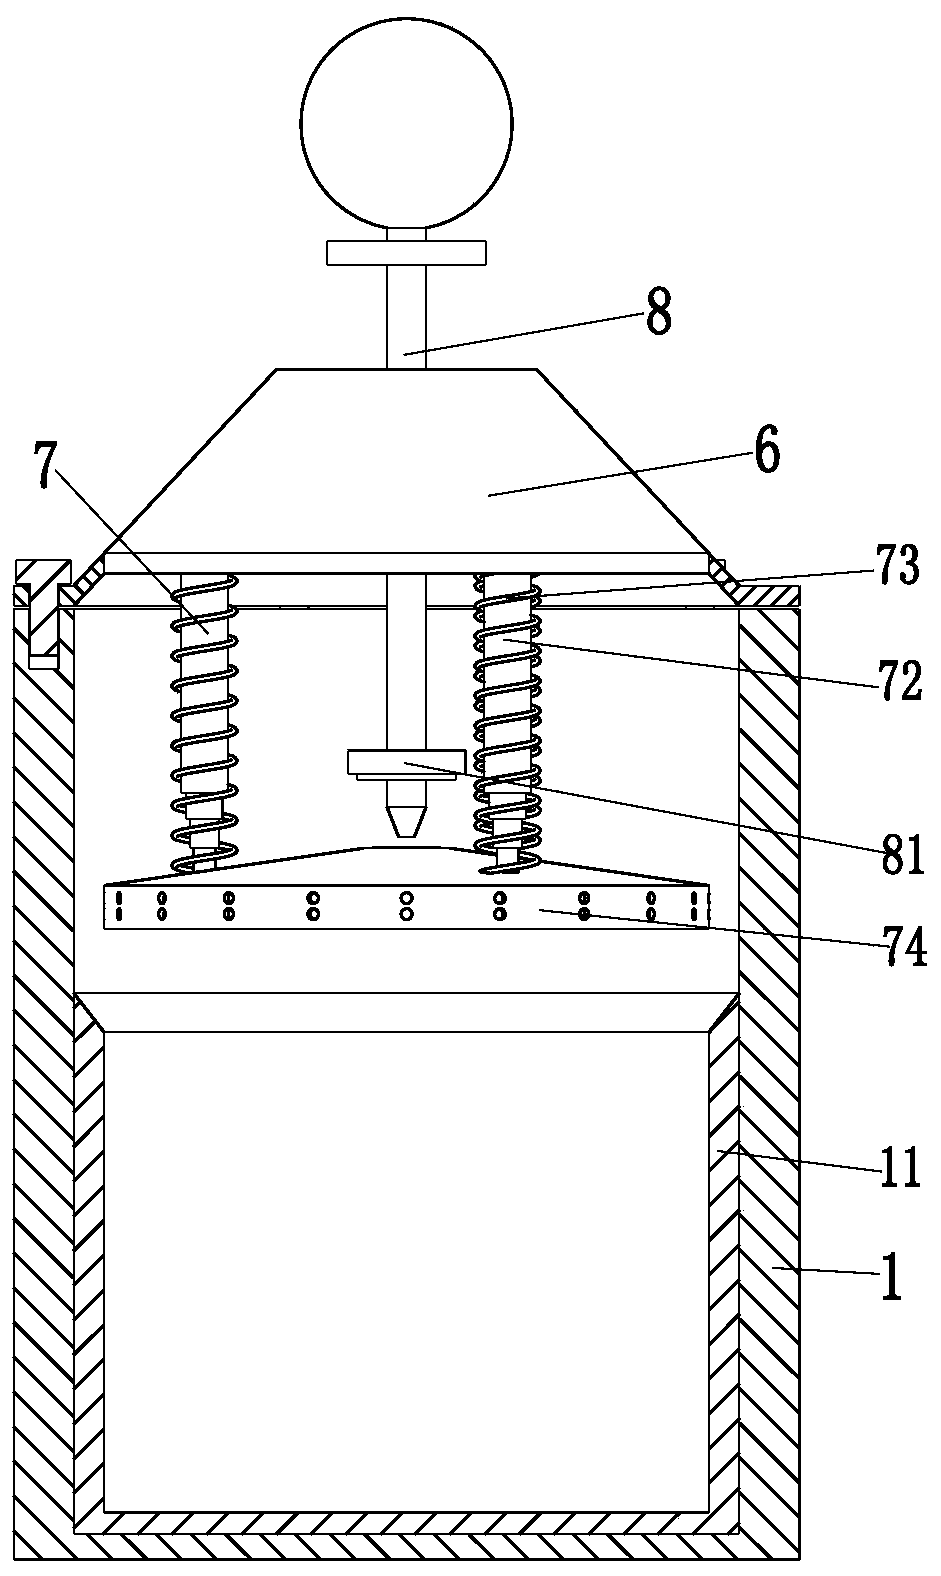 Post-treatment processing system for preparation of plant essential oil